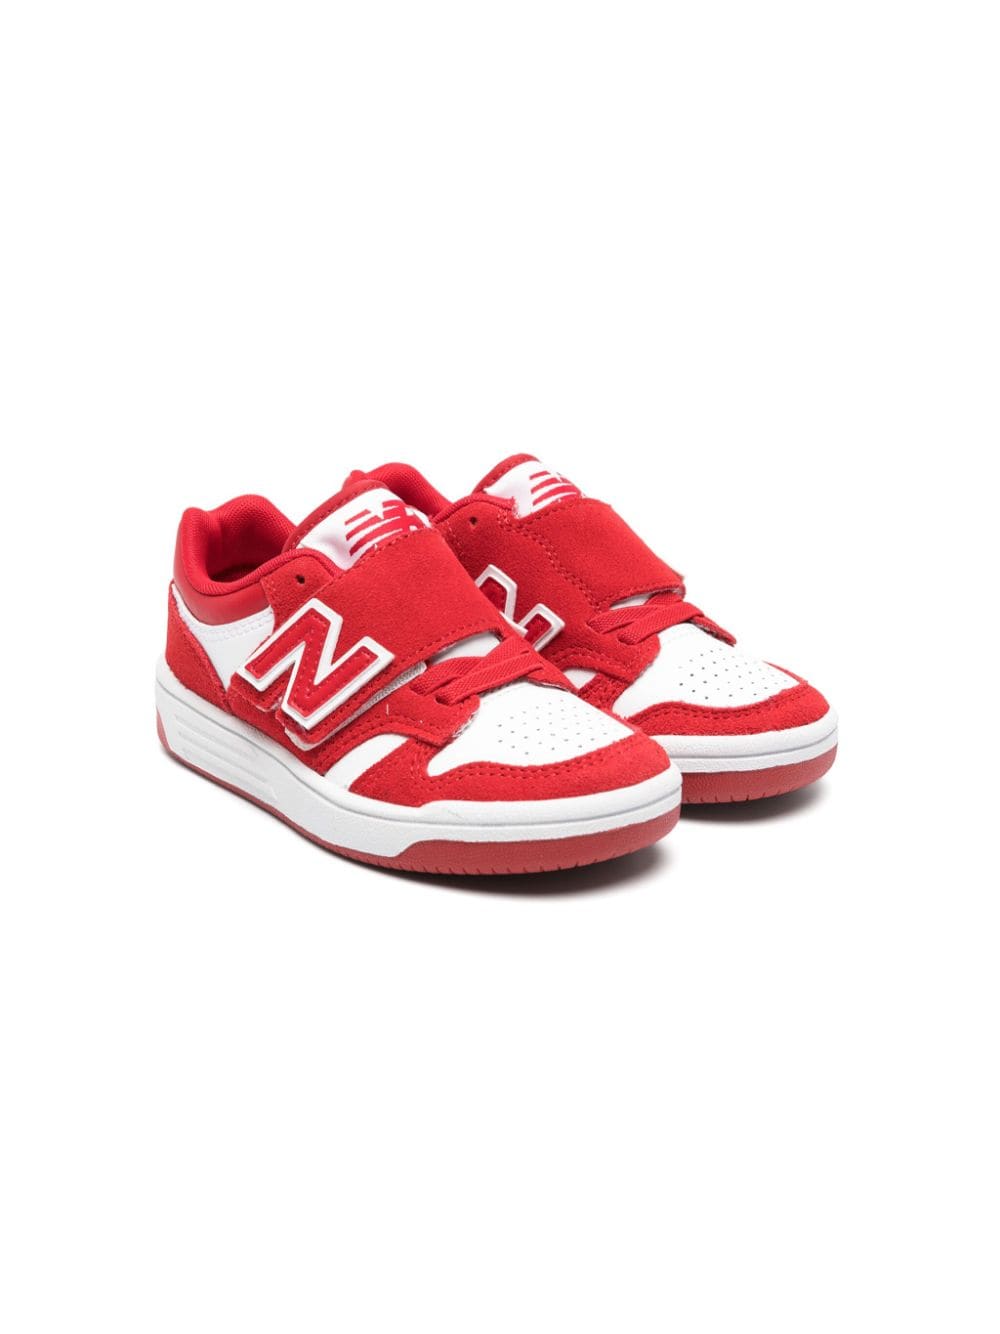 New Balance Kids 480 touch-strap sneakers - White